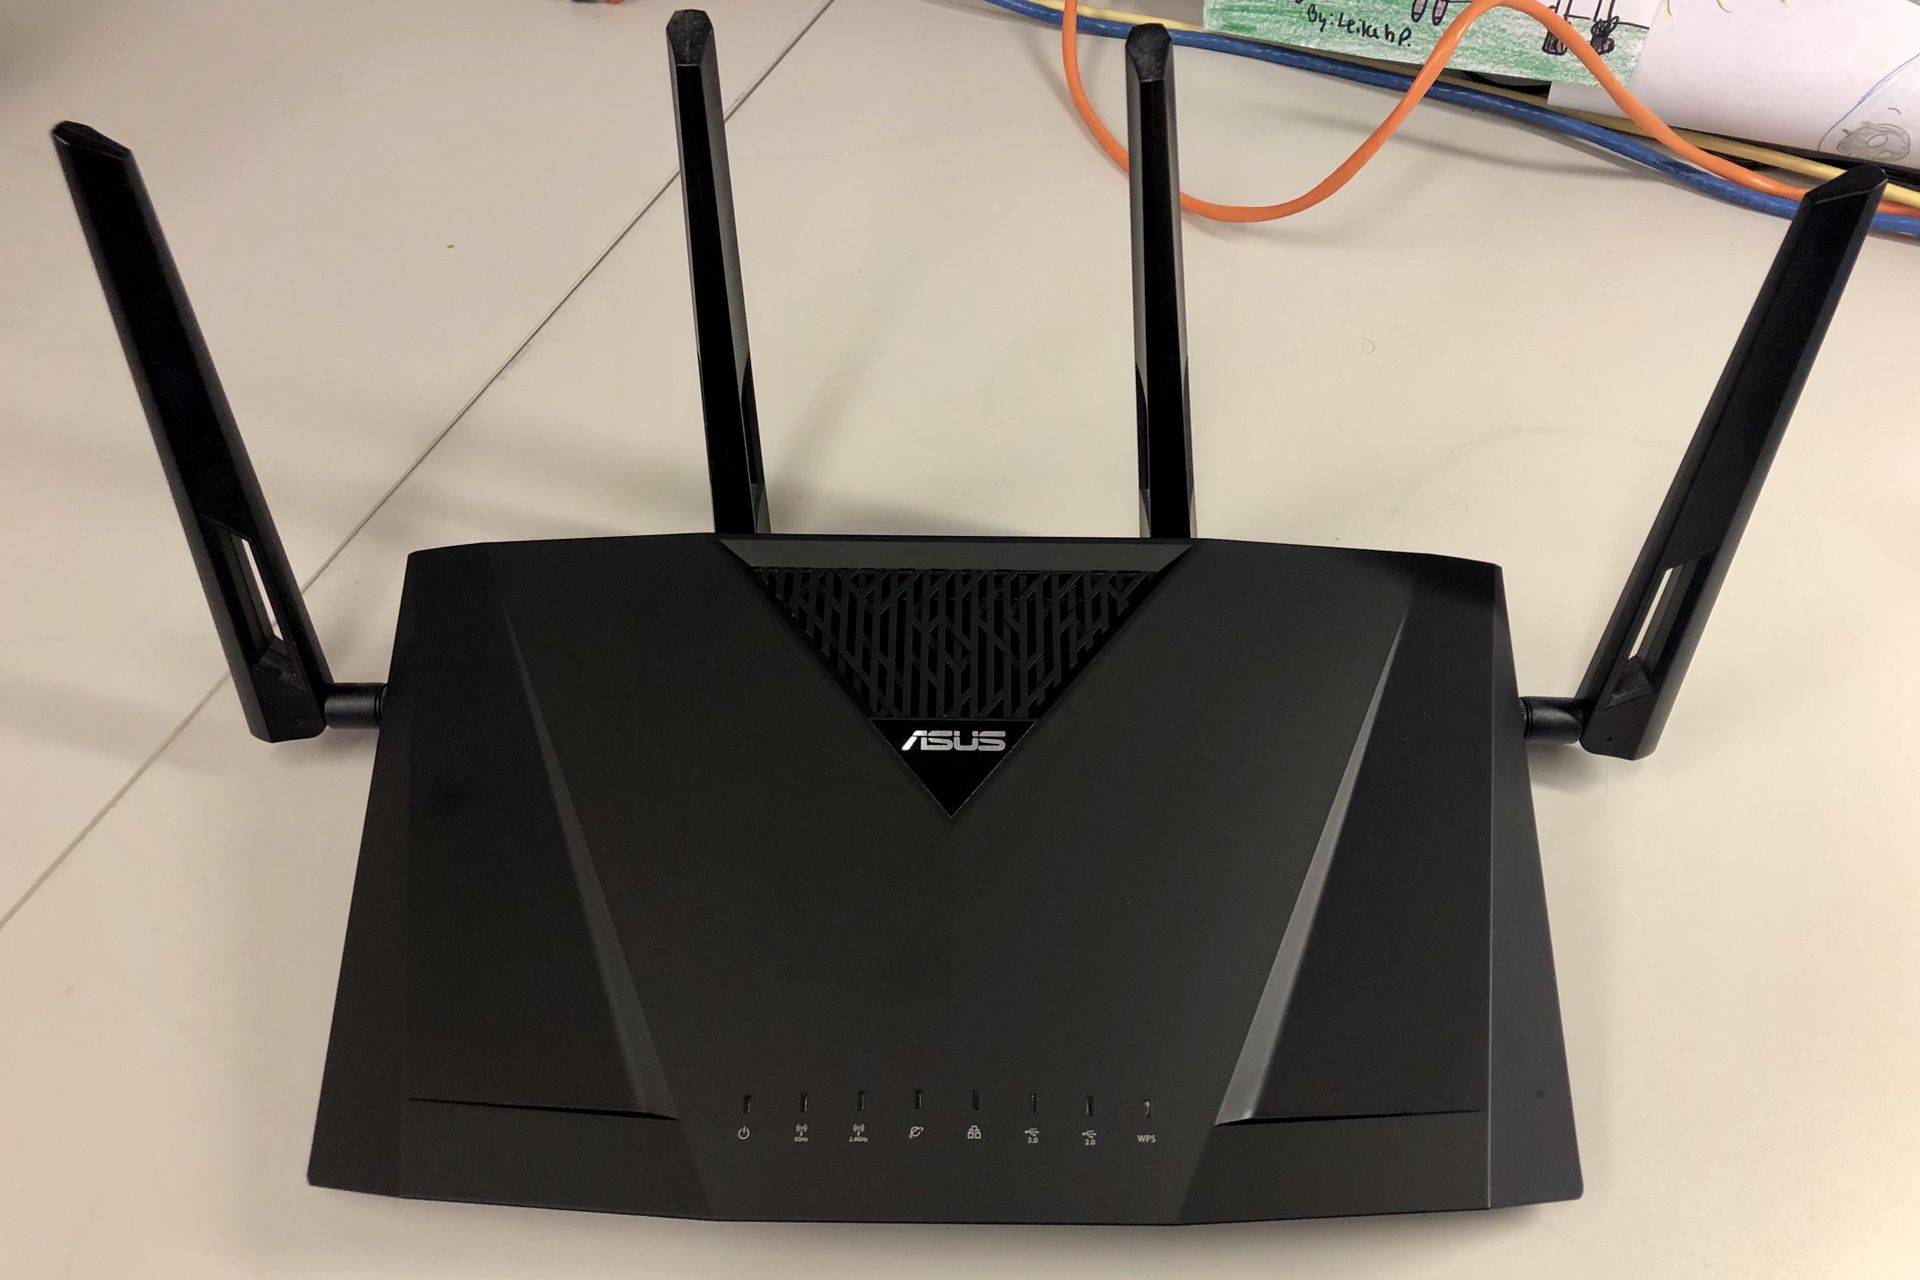 Asus Dual Band WiFi Router For Sale